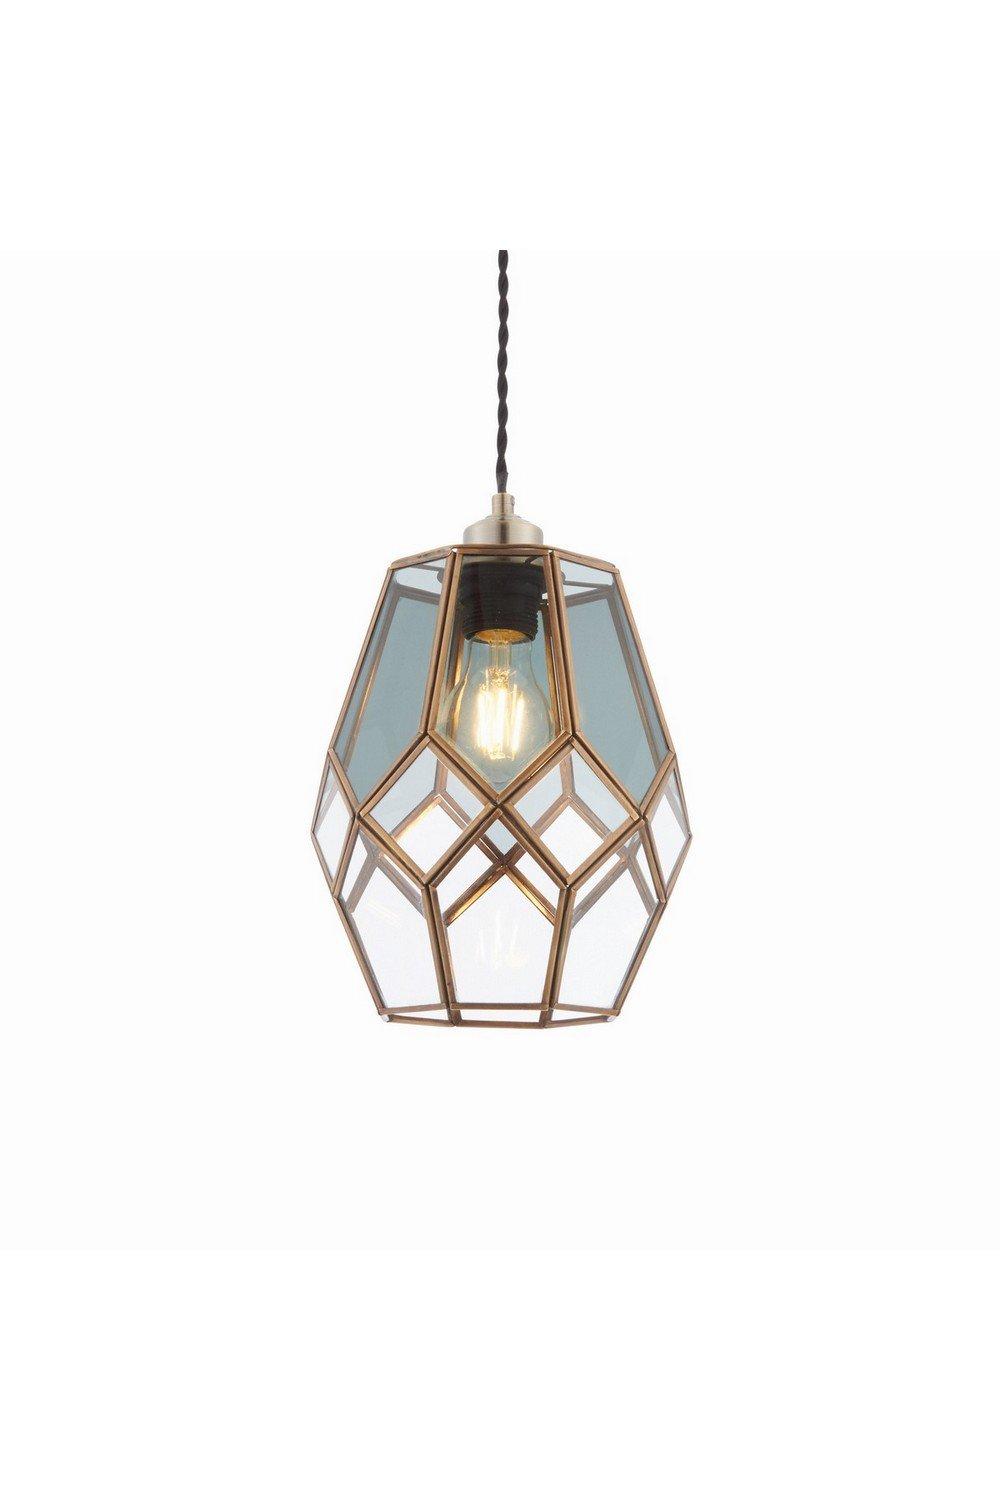 Ripley 1 Light Pendant Antique Solid Brass With Smoked Glass Detail E27